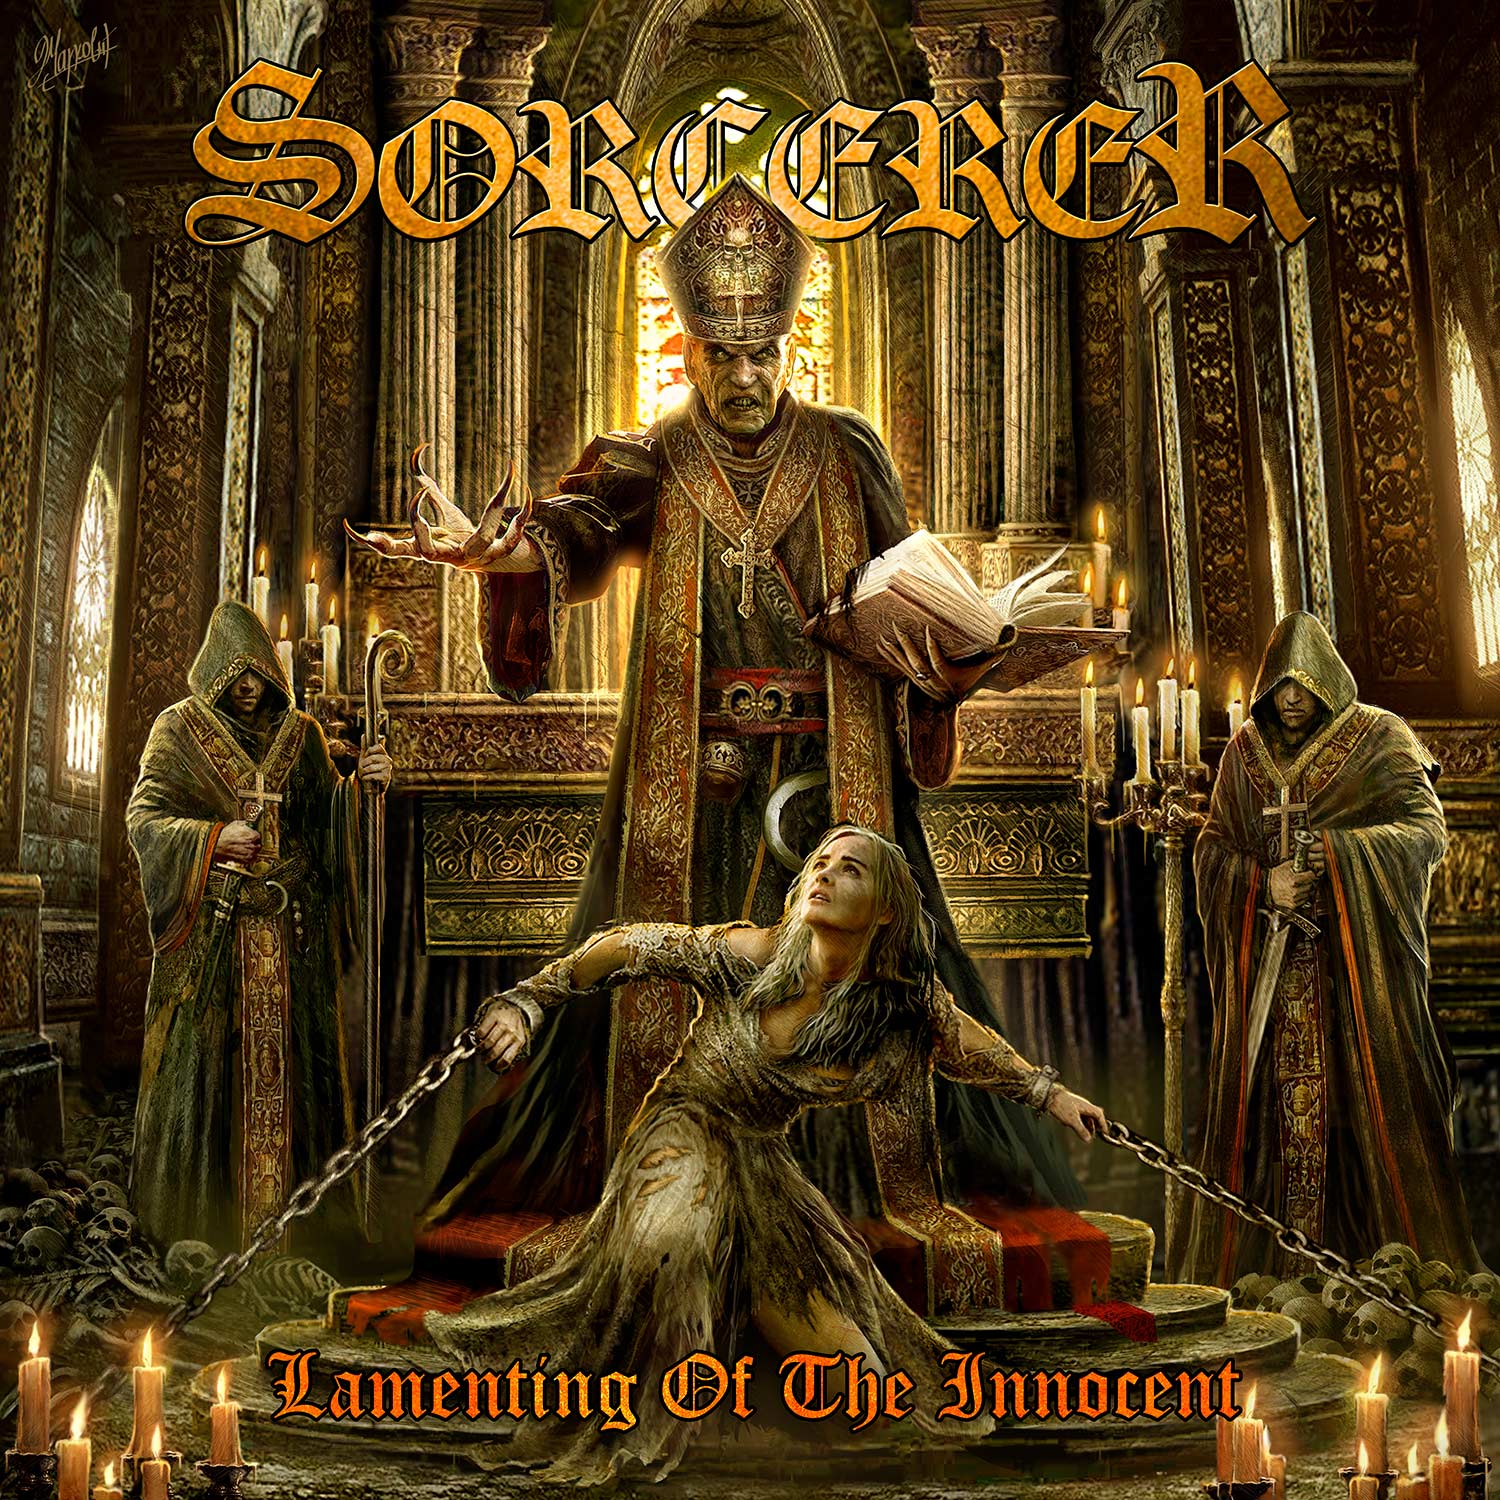 Sorcerer : Lamenting Of The Innocent